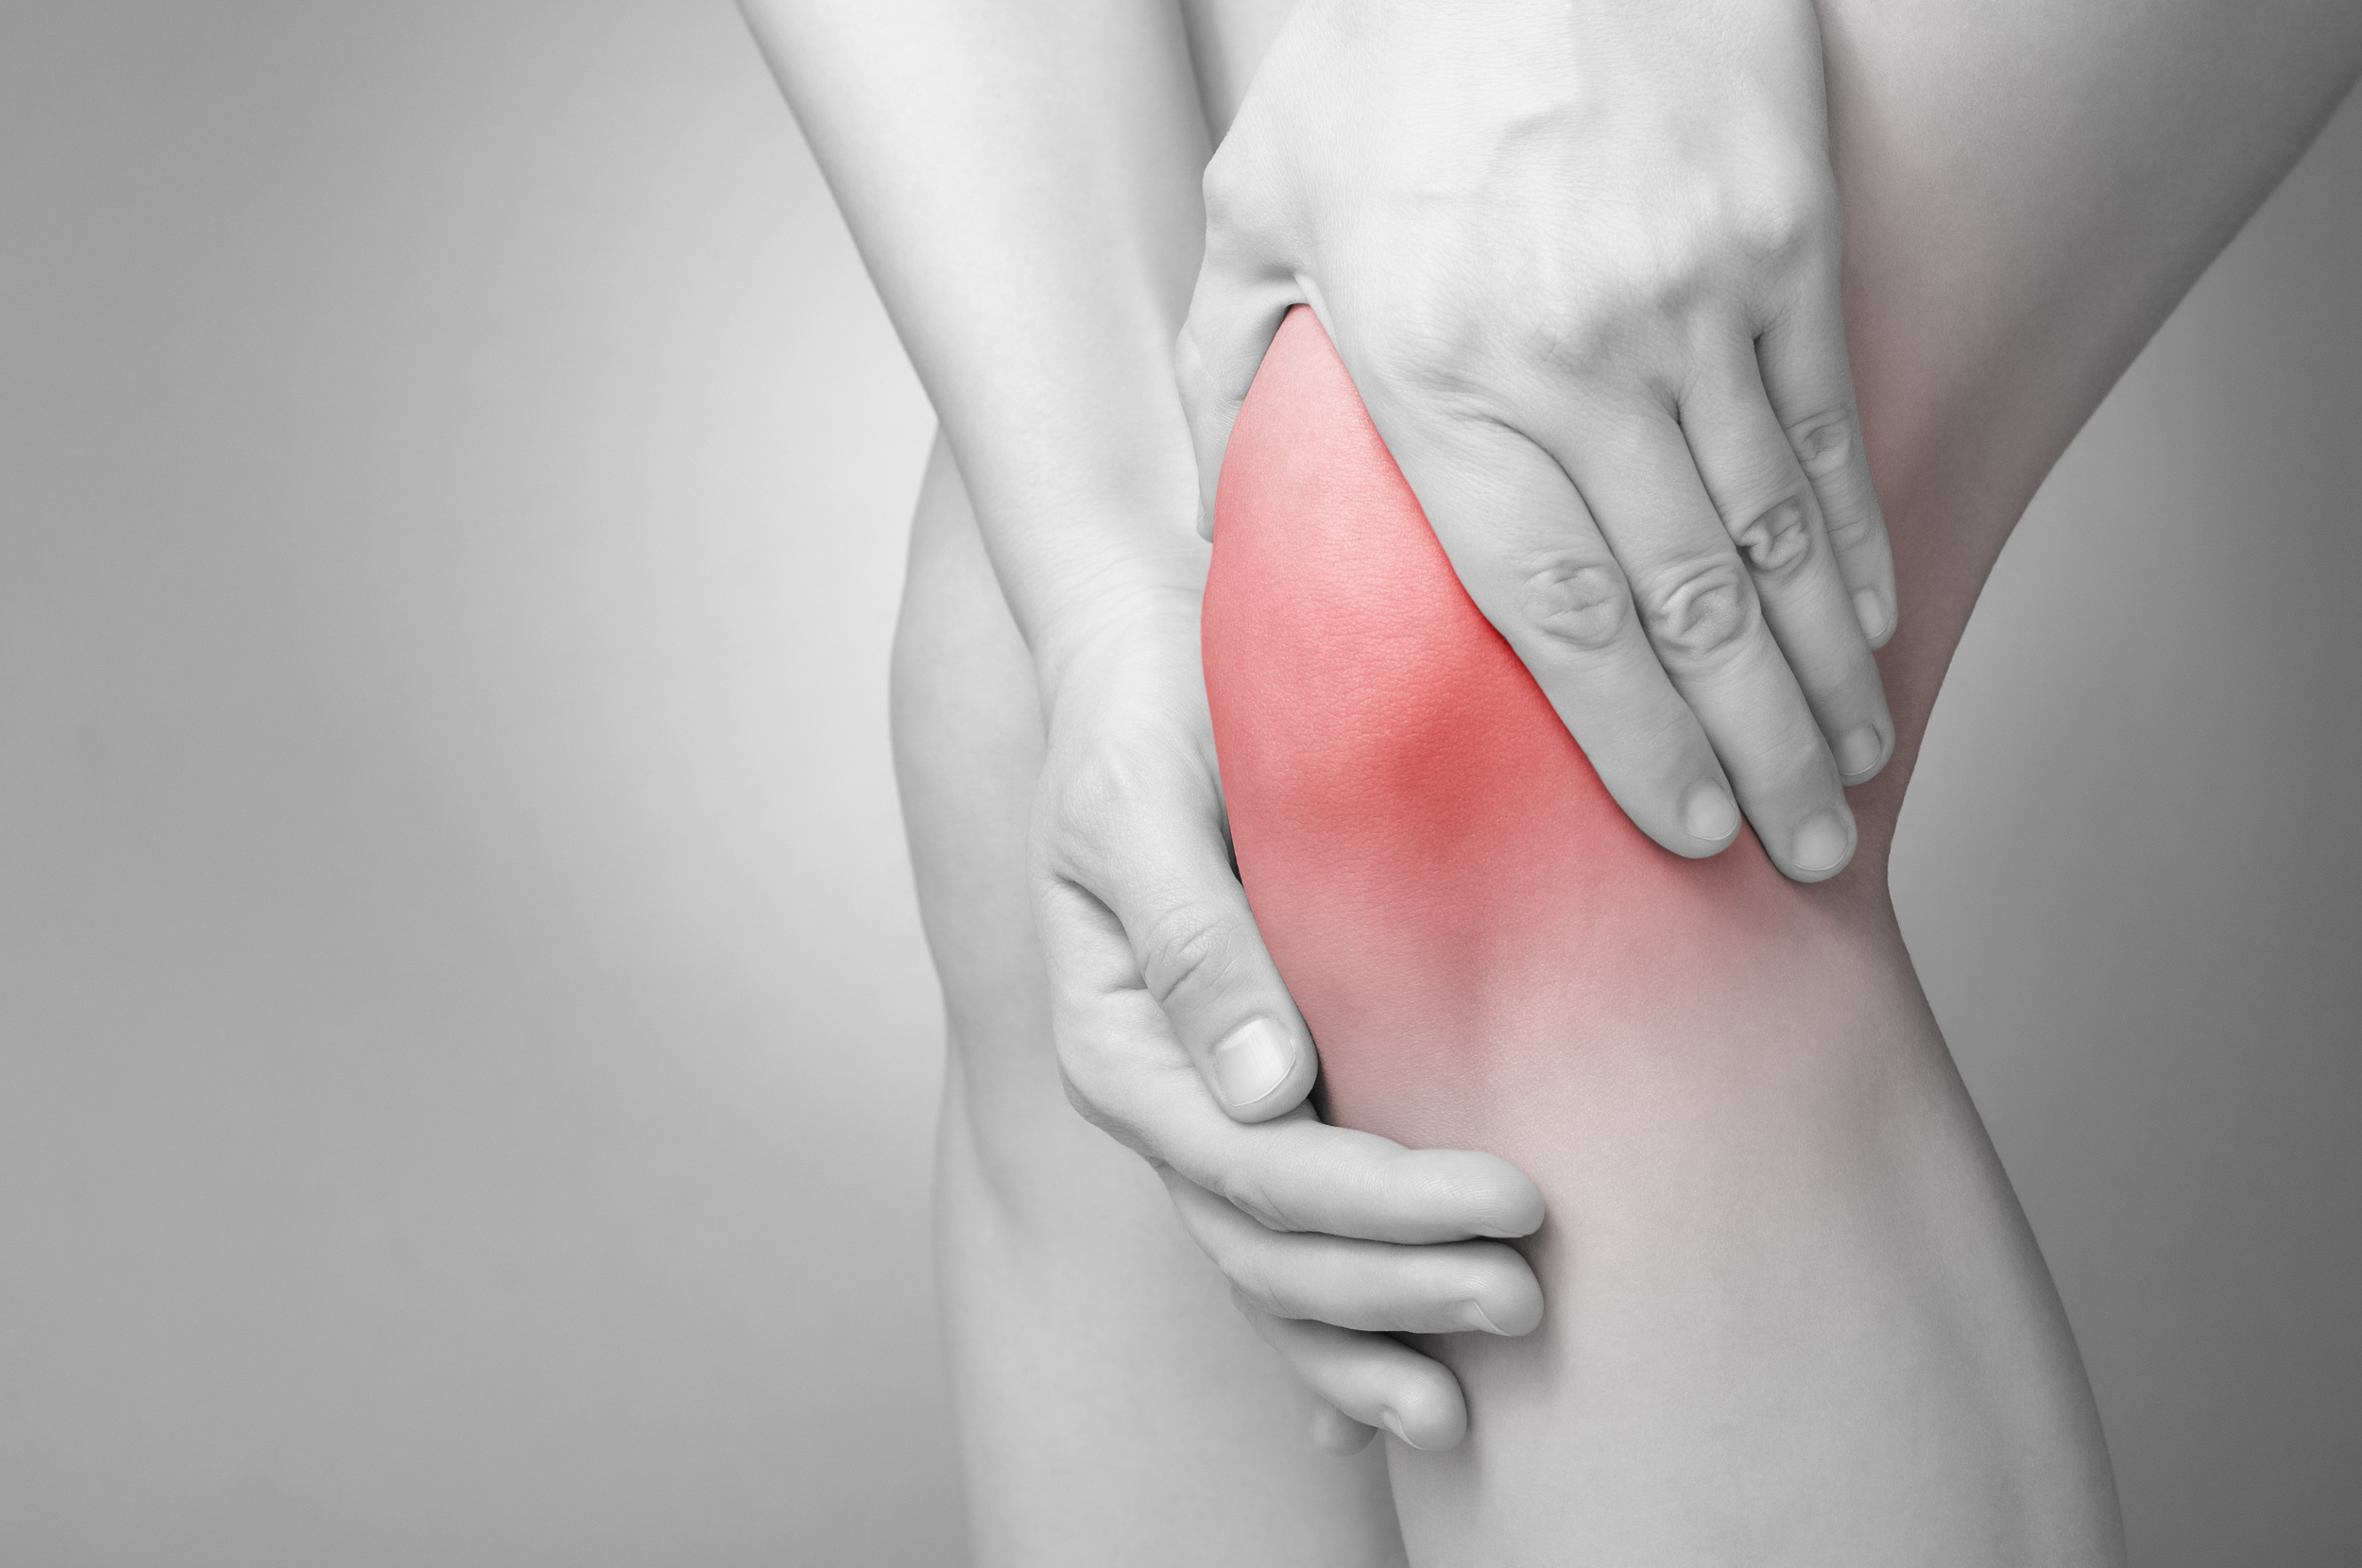 Causes of knee pain / issues